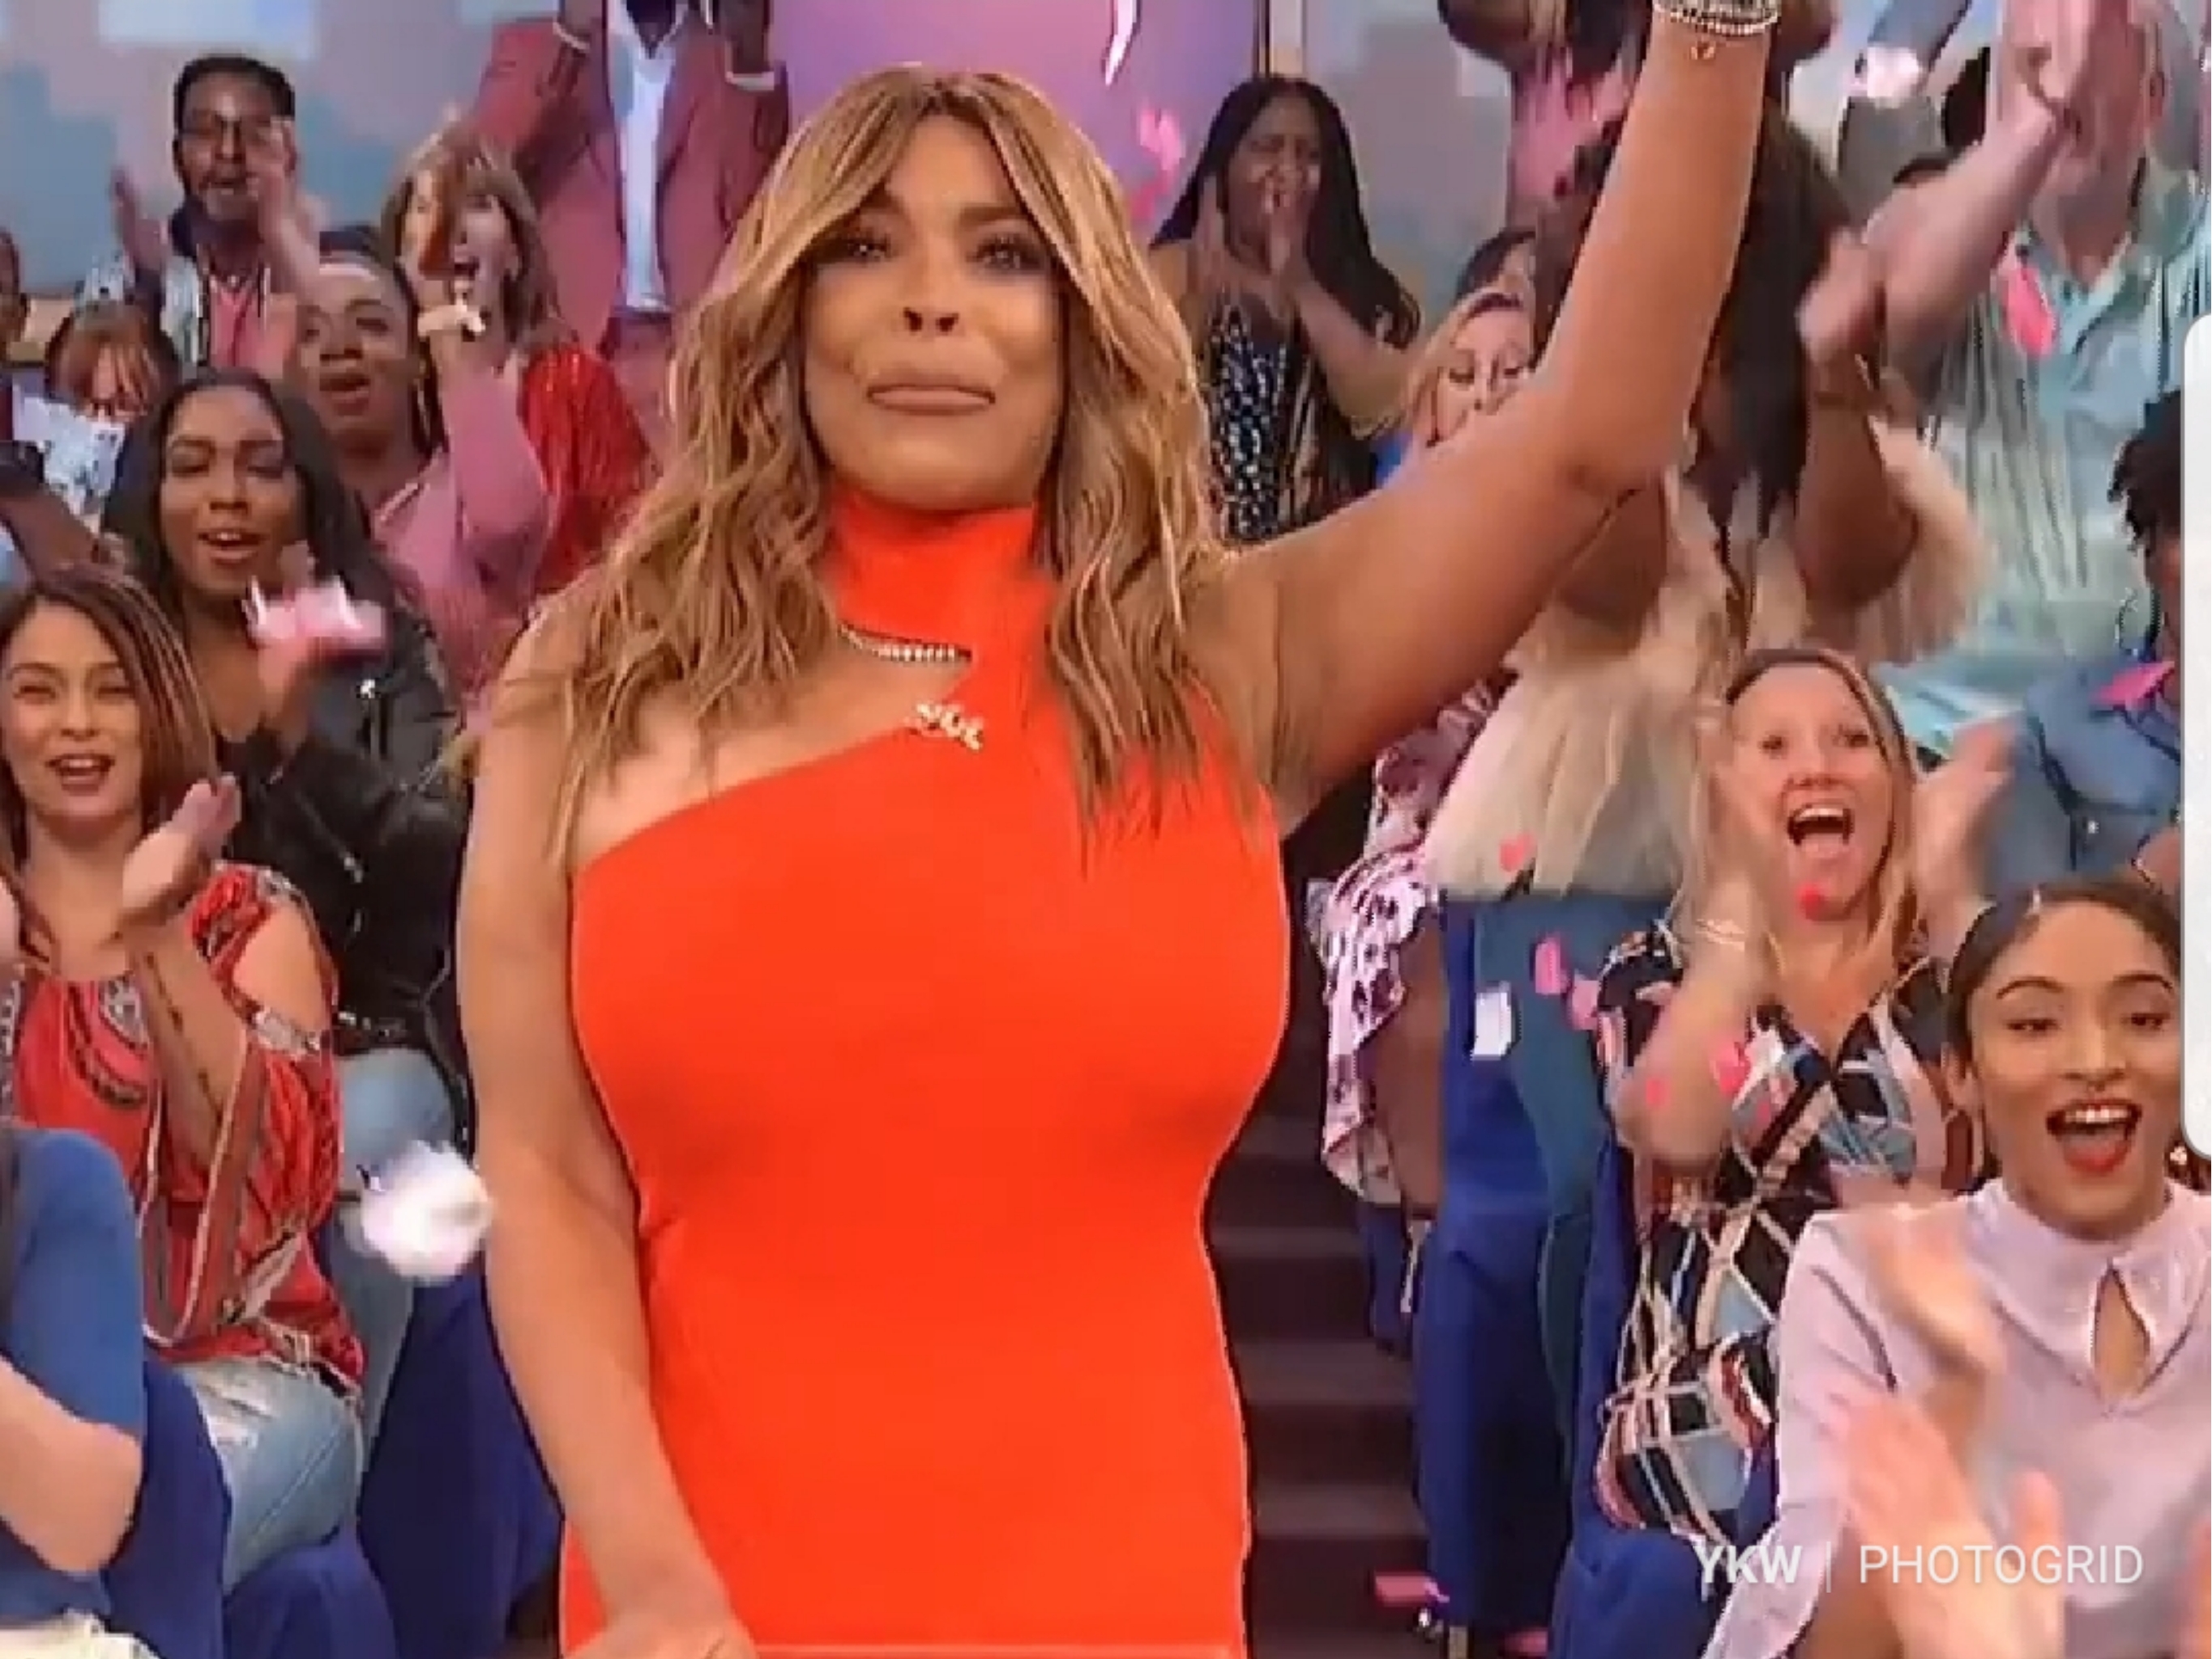 How You Doin’? The Wendy Williams Show Has Been Renewed Through 2022